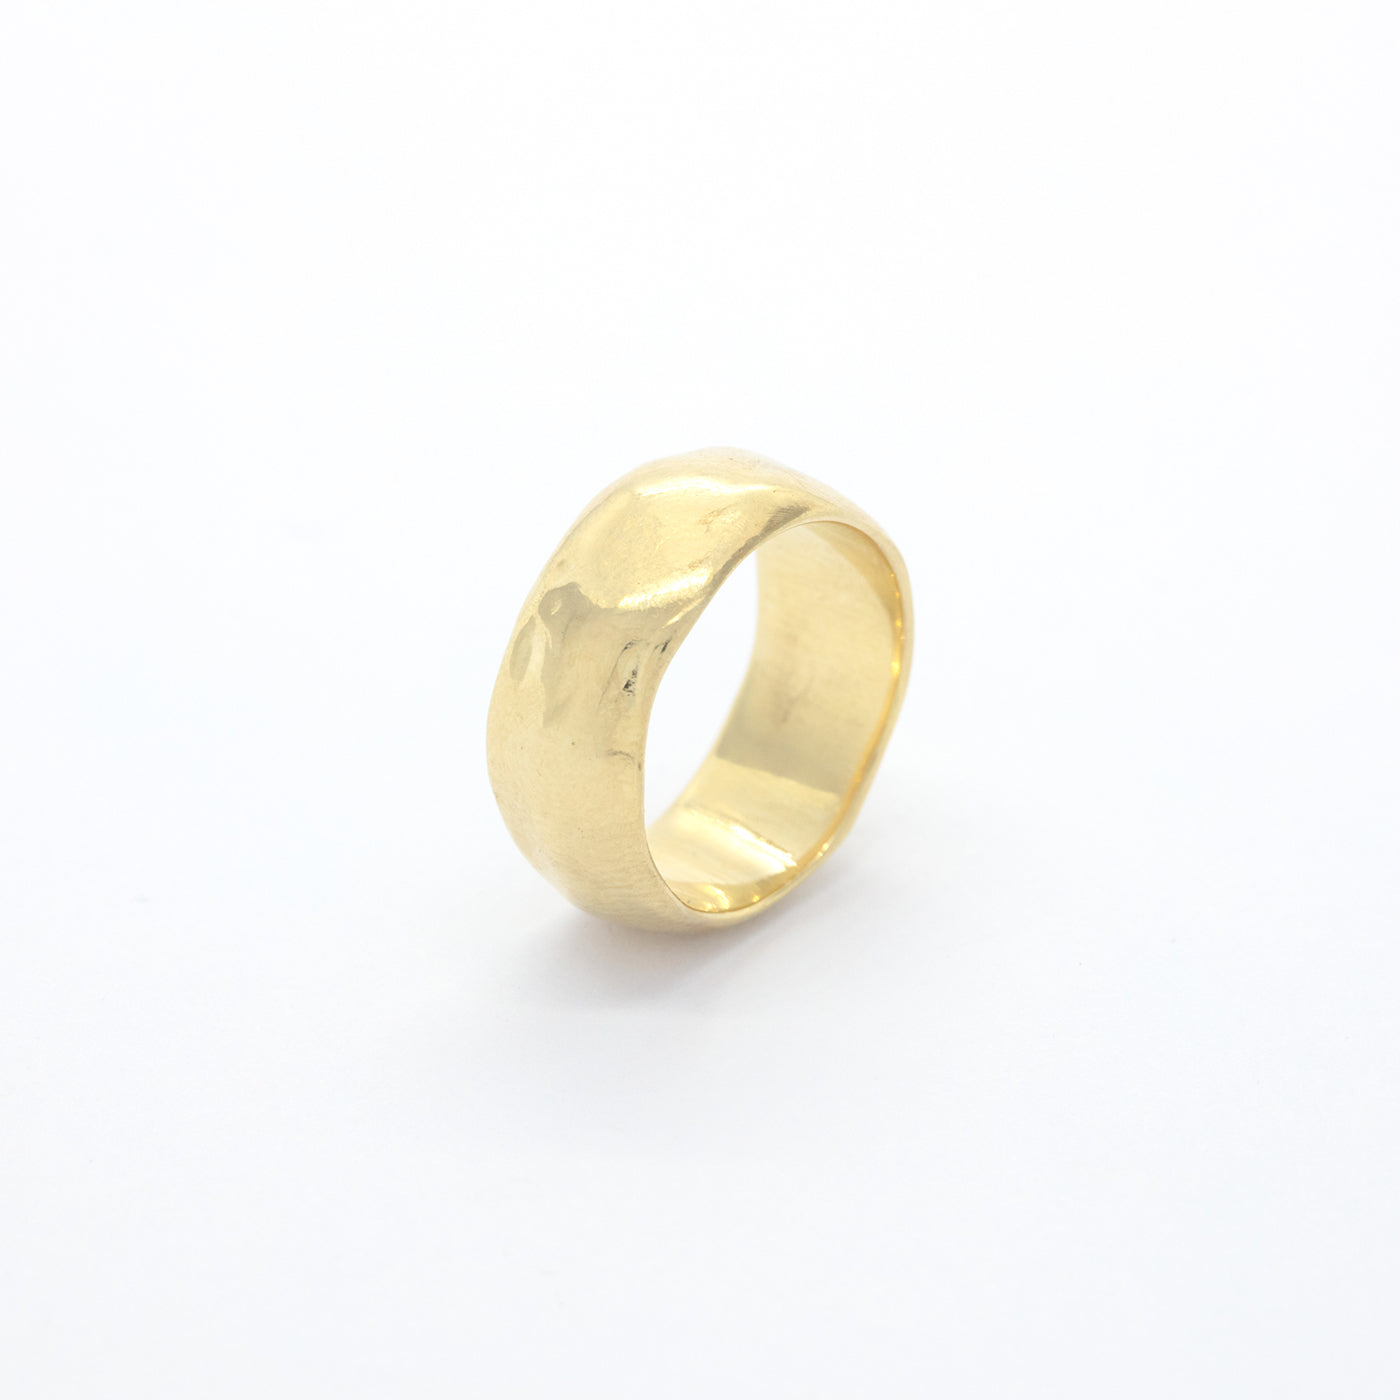 Ring Lada Wedding Band for Her 14ct or 18ct yellow gold product view innan jewellery independent atelier berlin